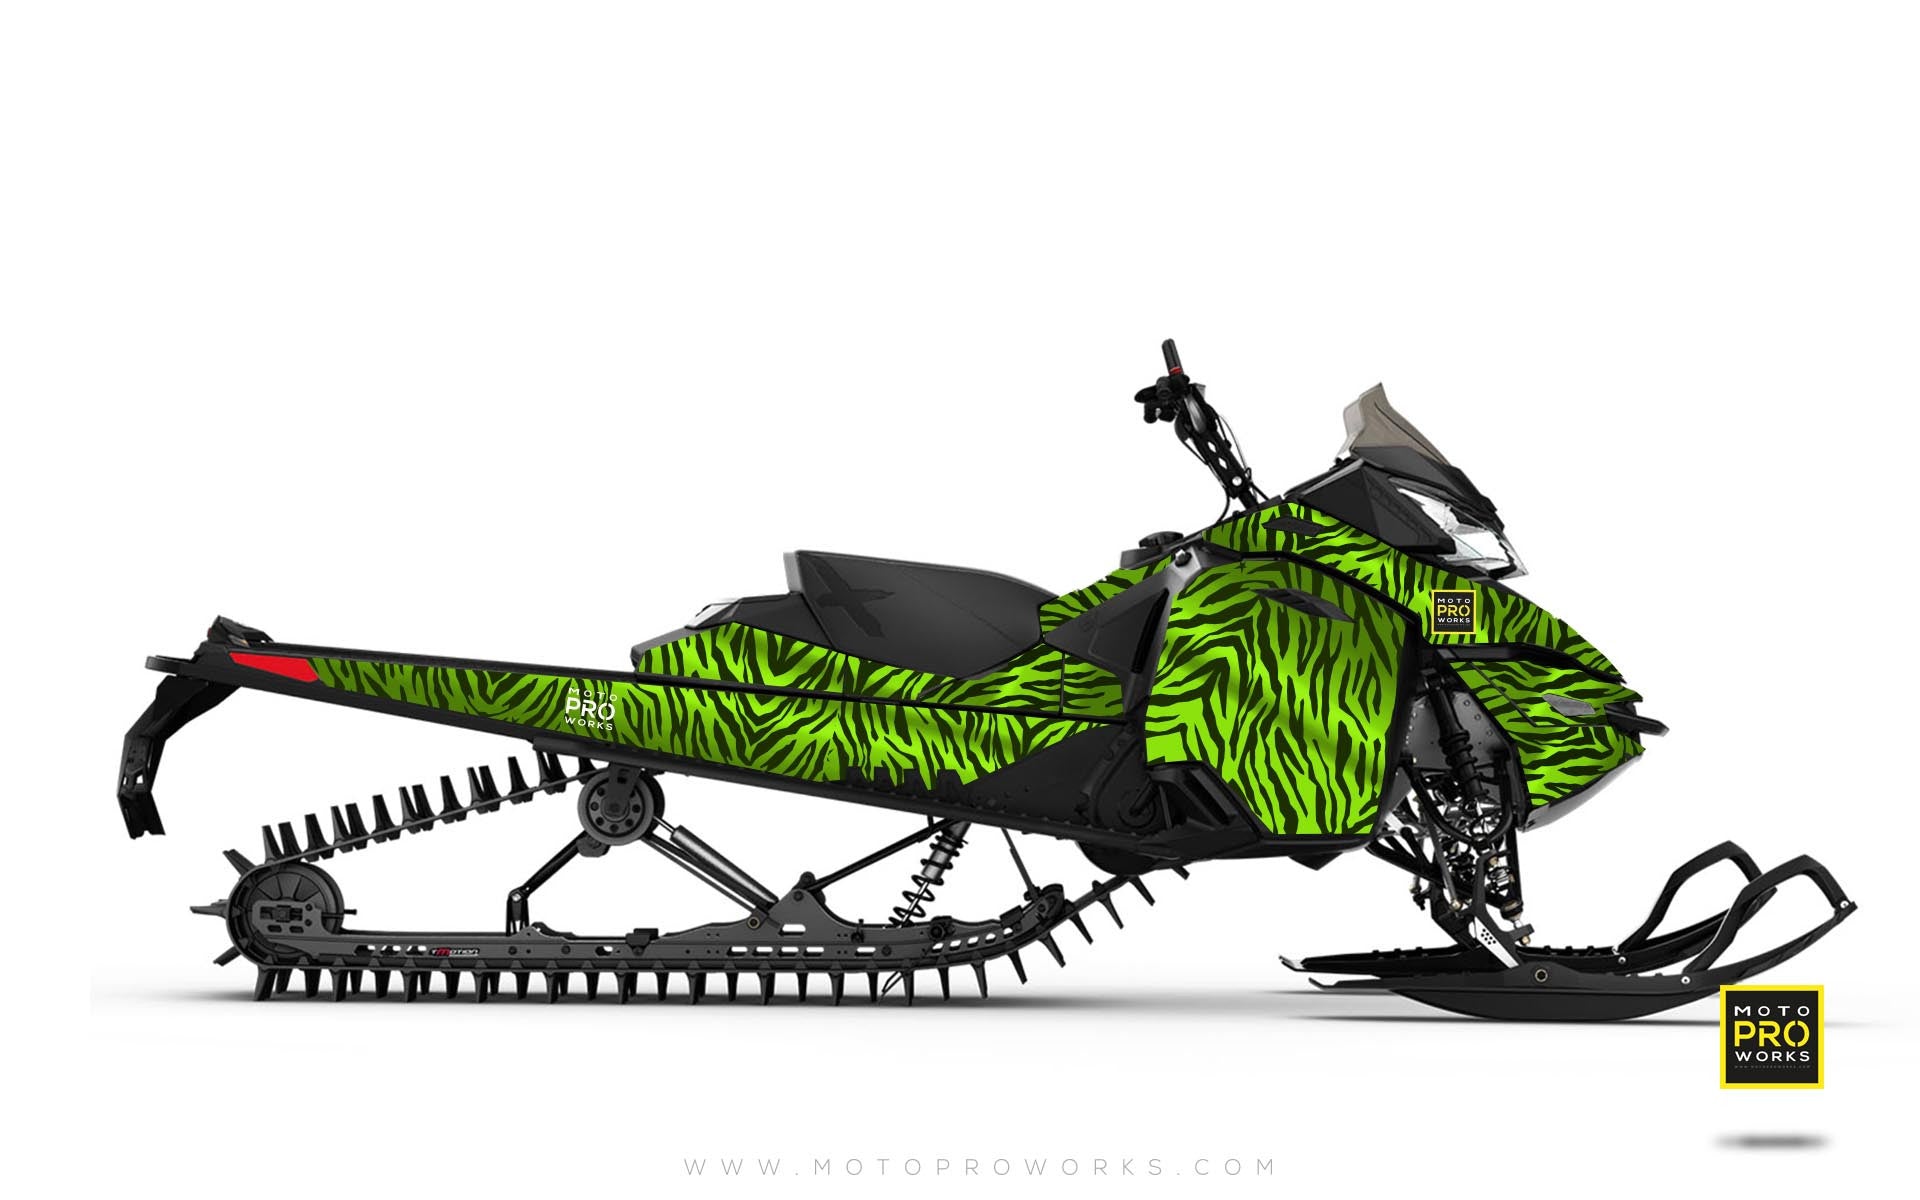 Ski-Doo Graphics - "Stripey" (solid green) - MotoProWorks | Decals and Bike Graphic kit